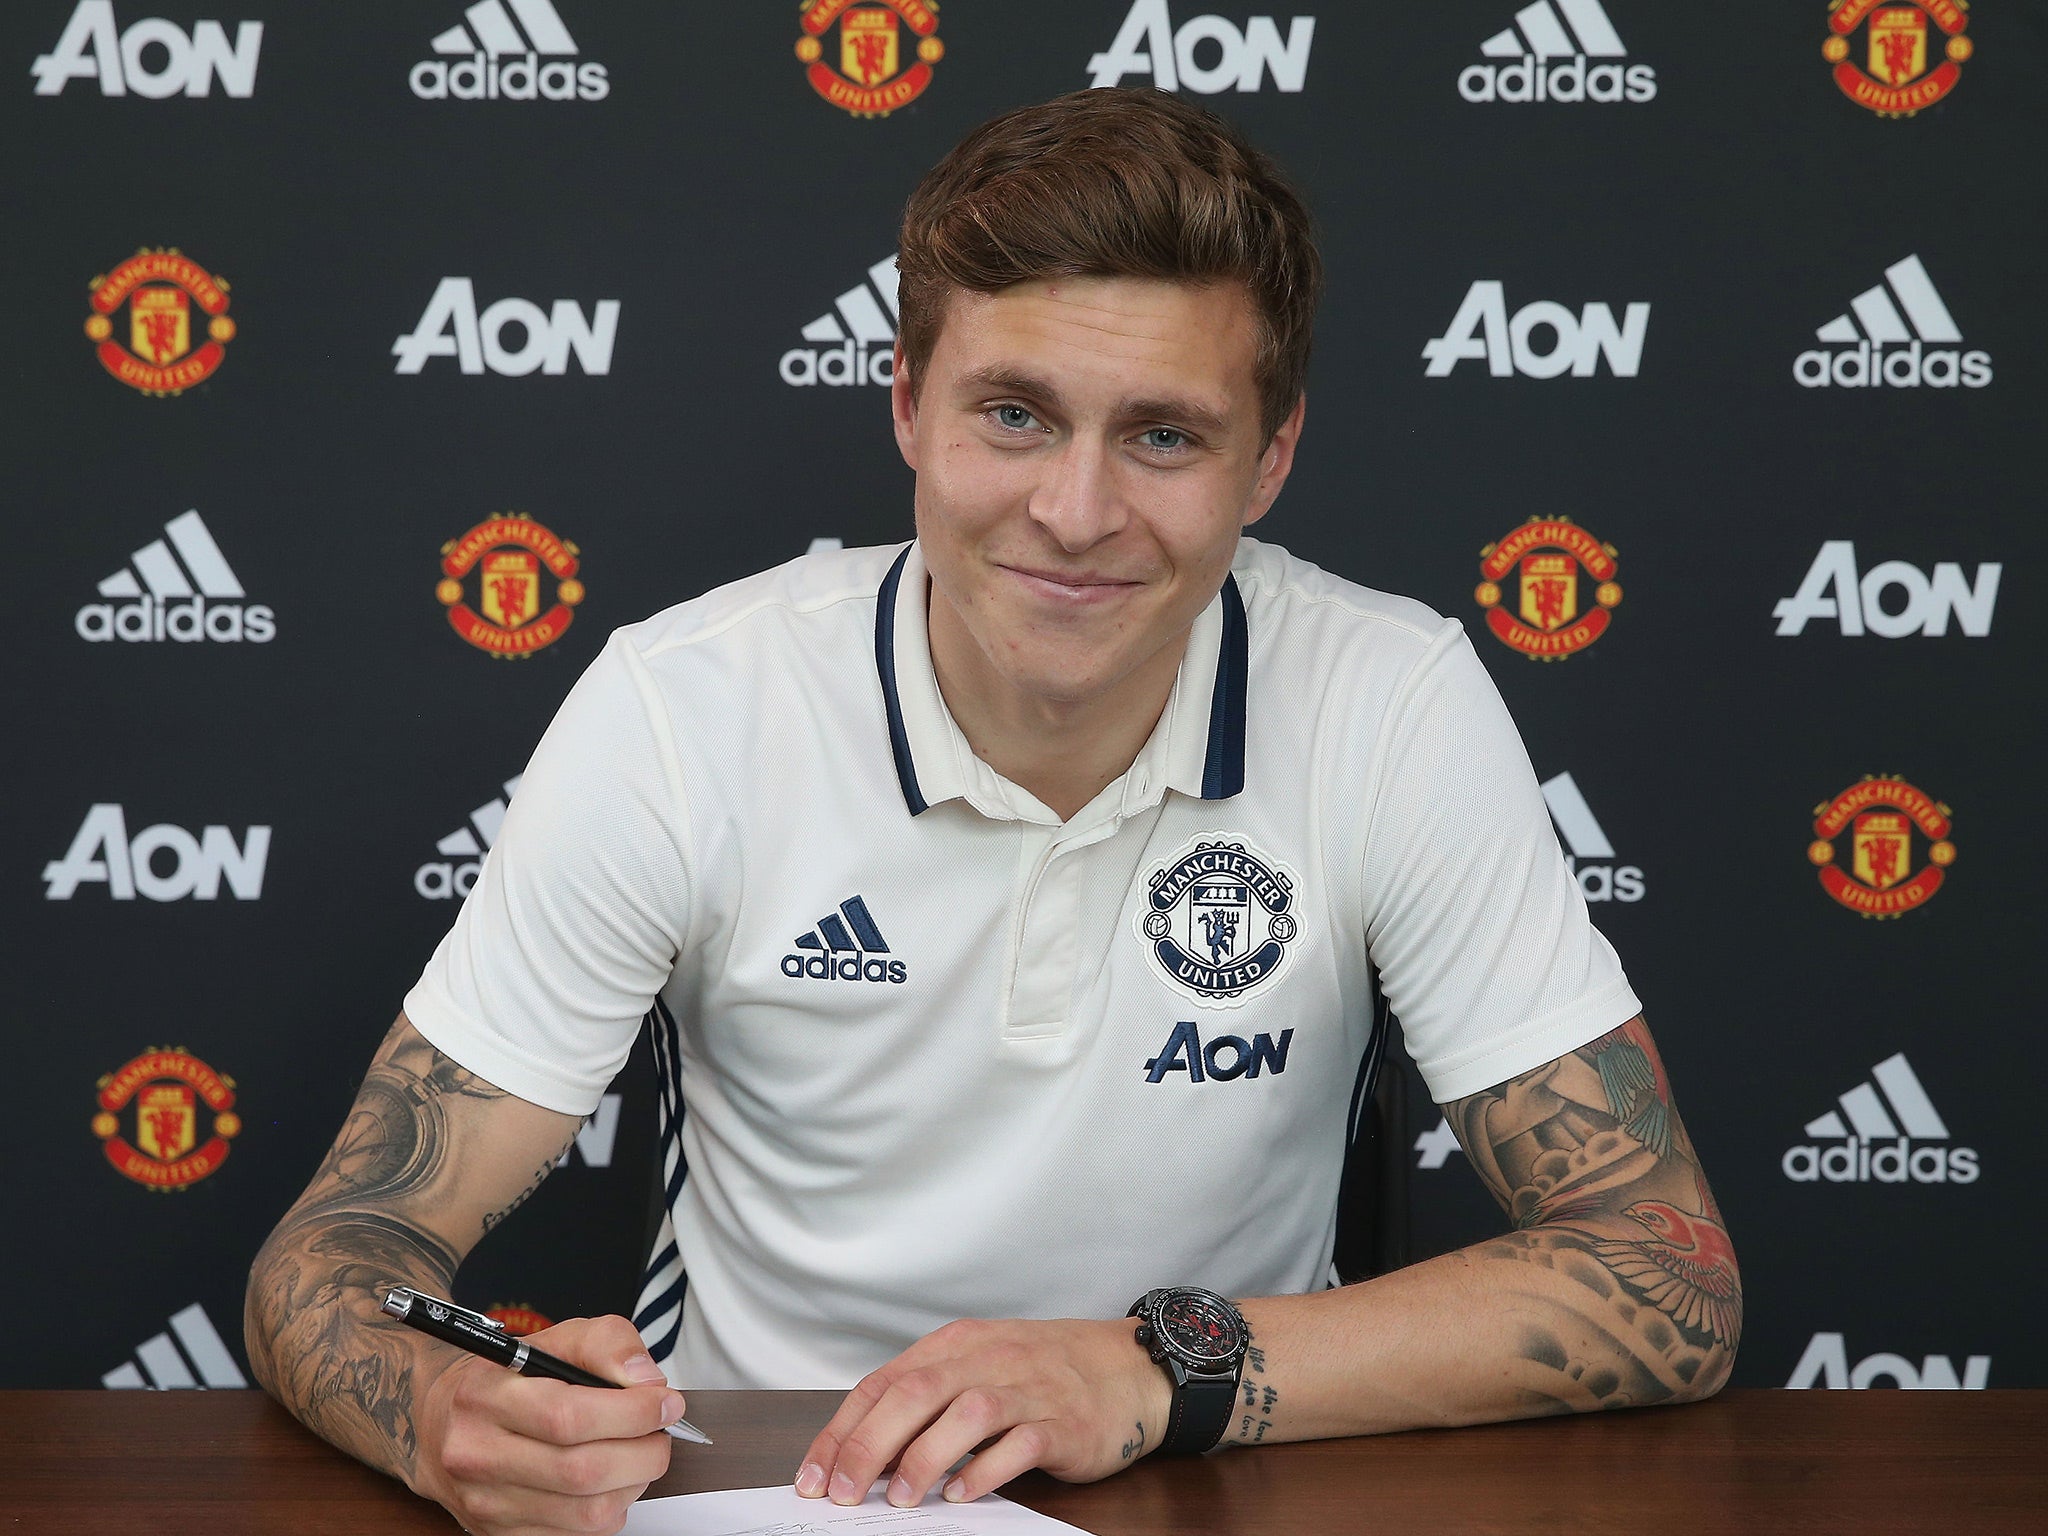 Lindelof has been used sparingly so far by Mourinho